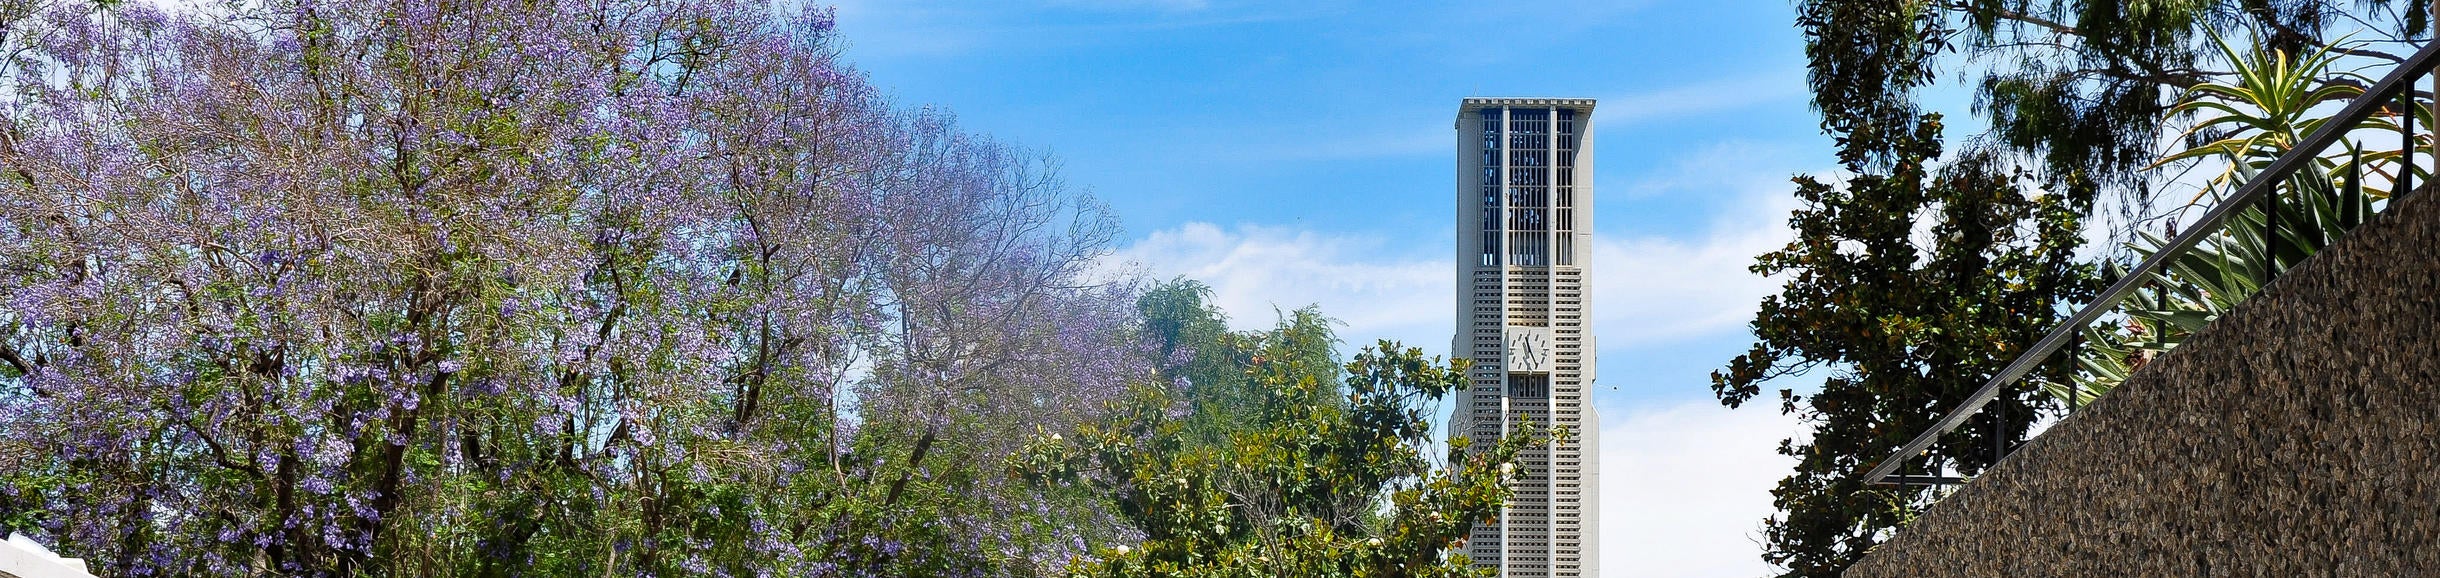 Blooming Tree and UCR Tower